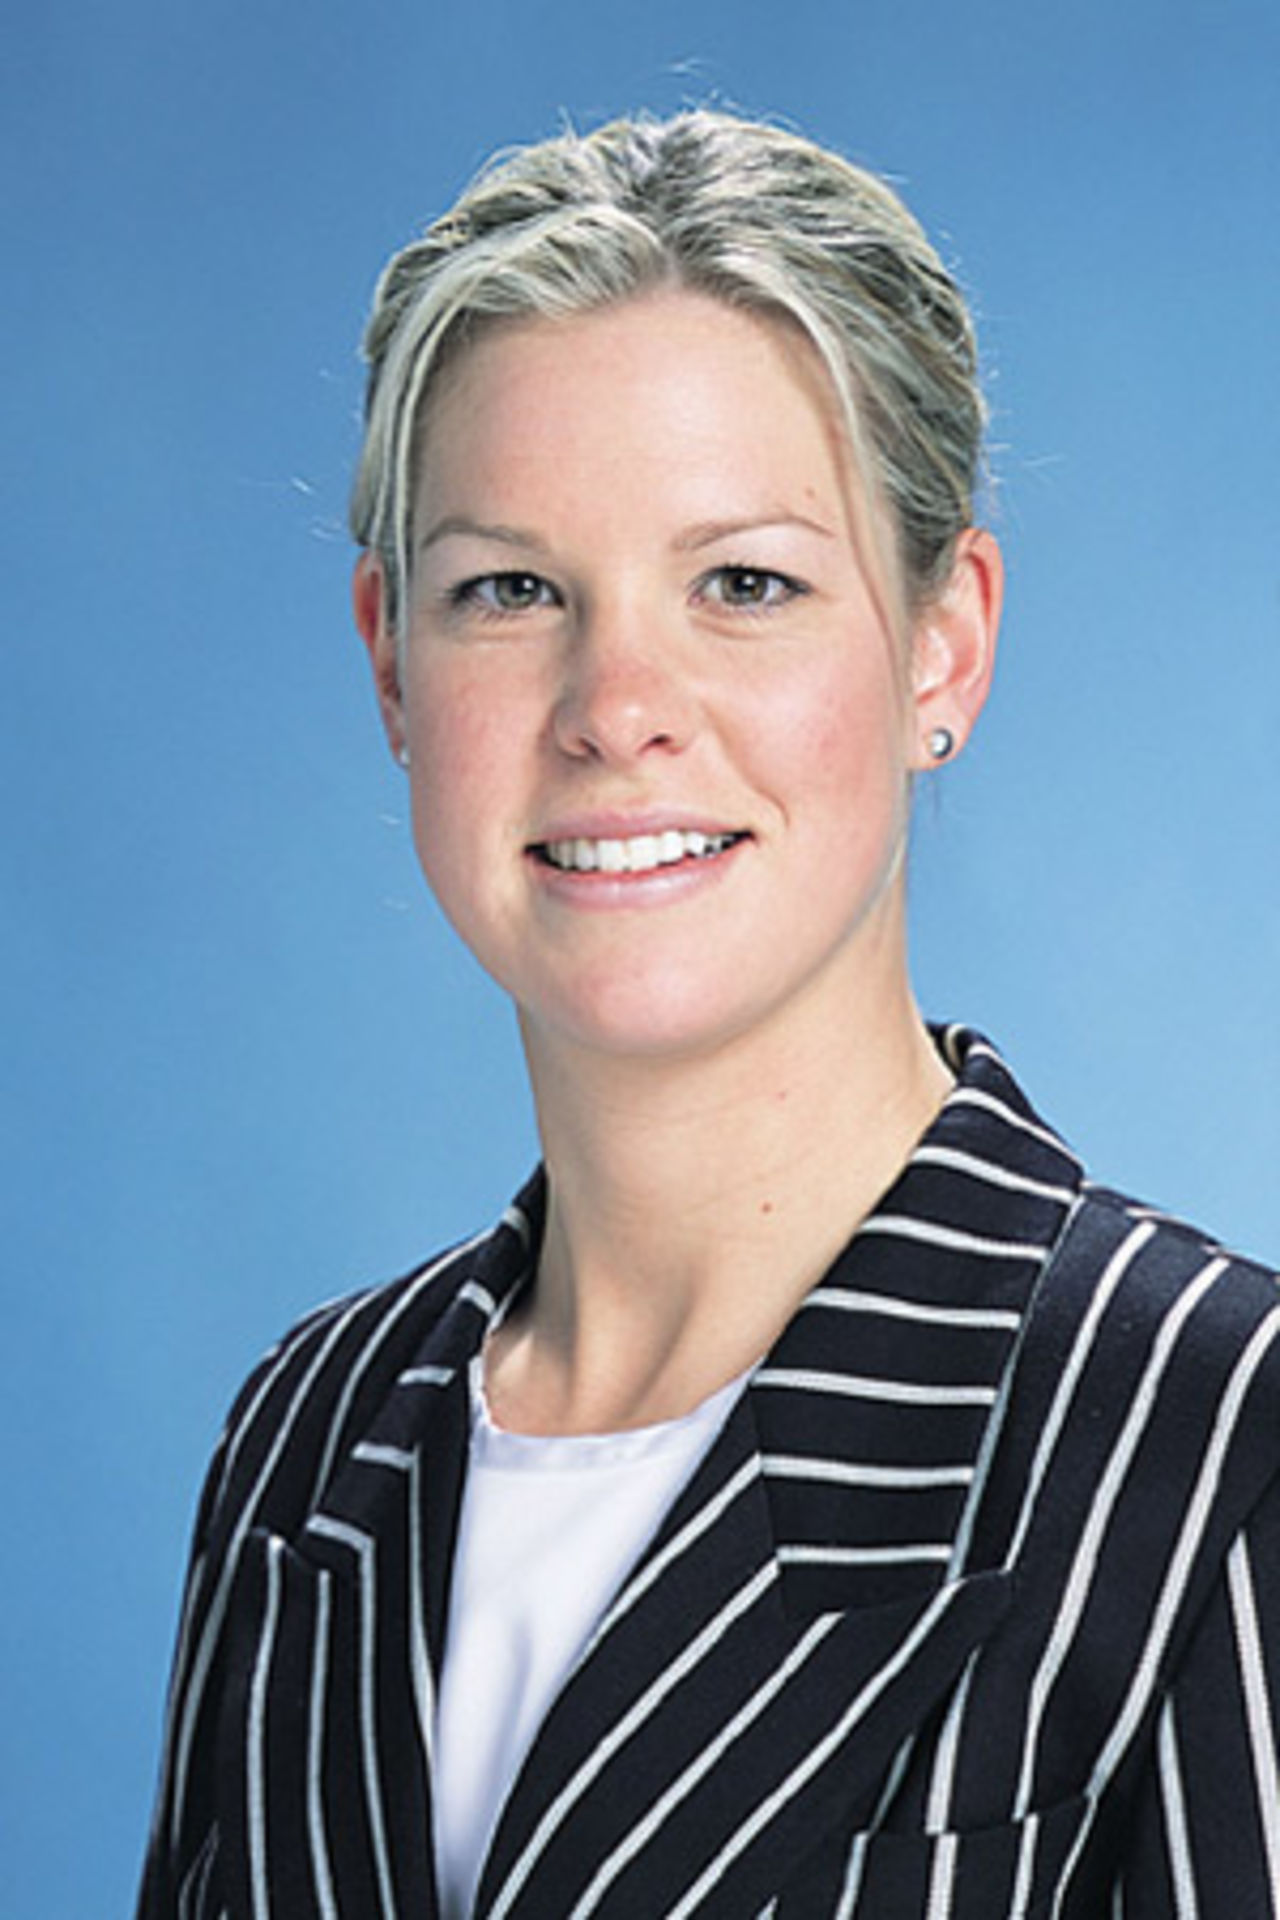 Portrait of Emily Travers - New Zealand women's player in the 2001/02 season.